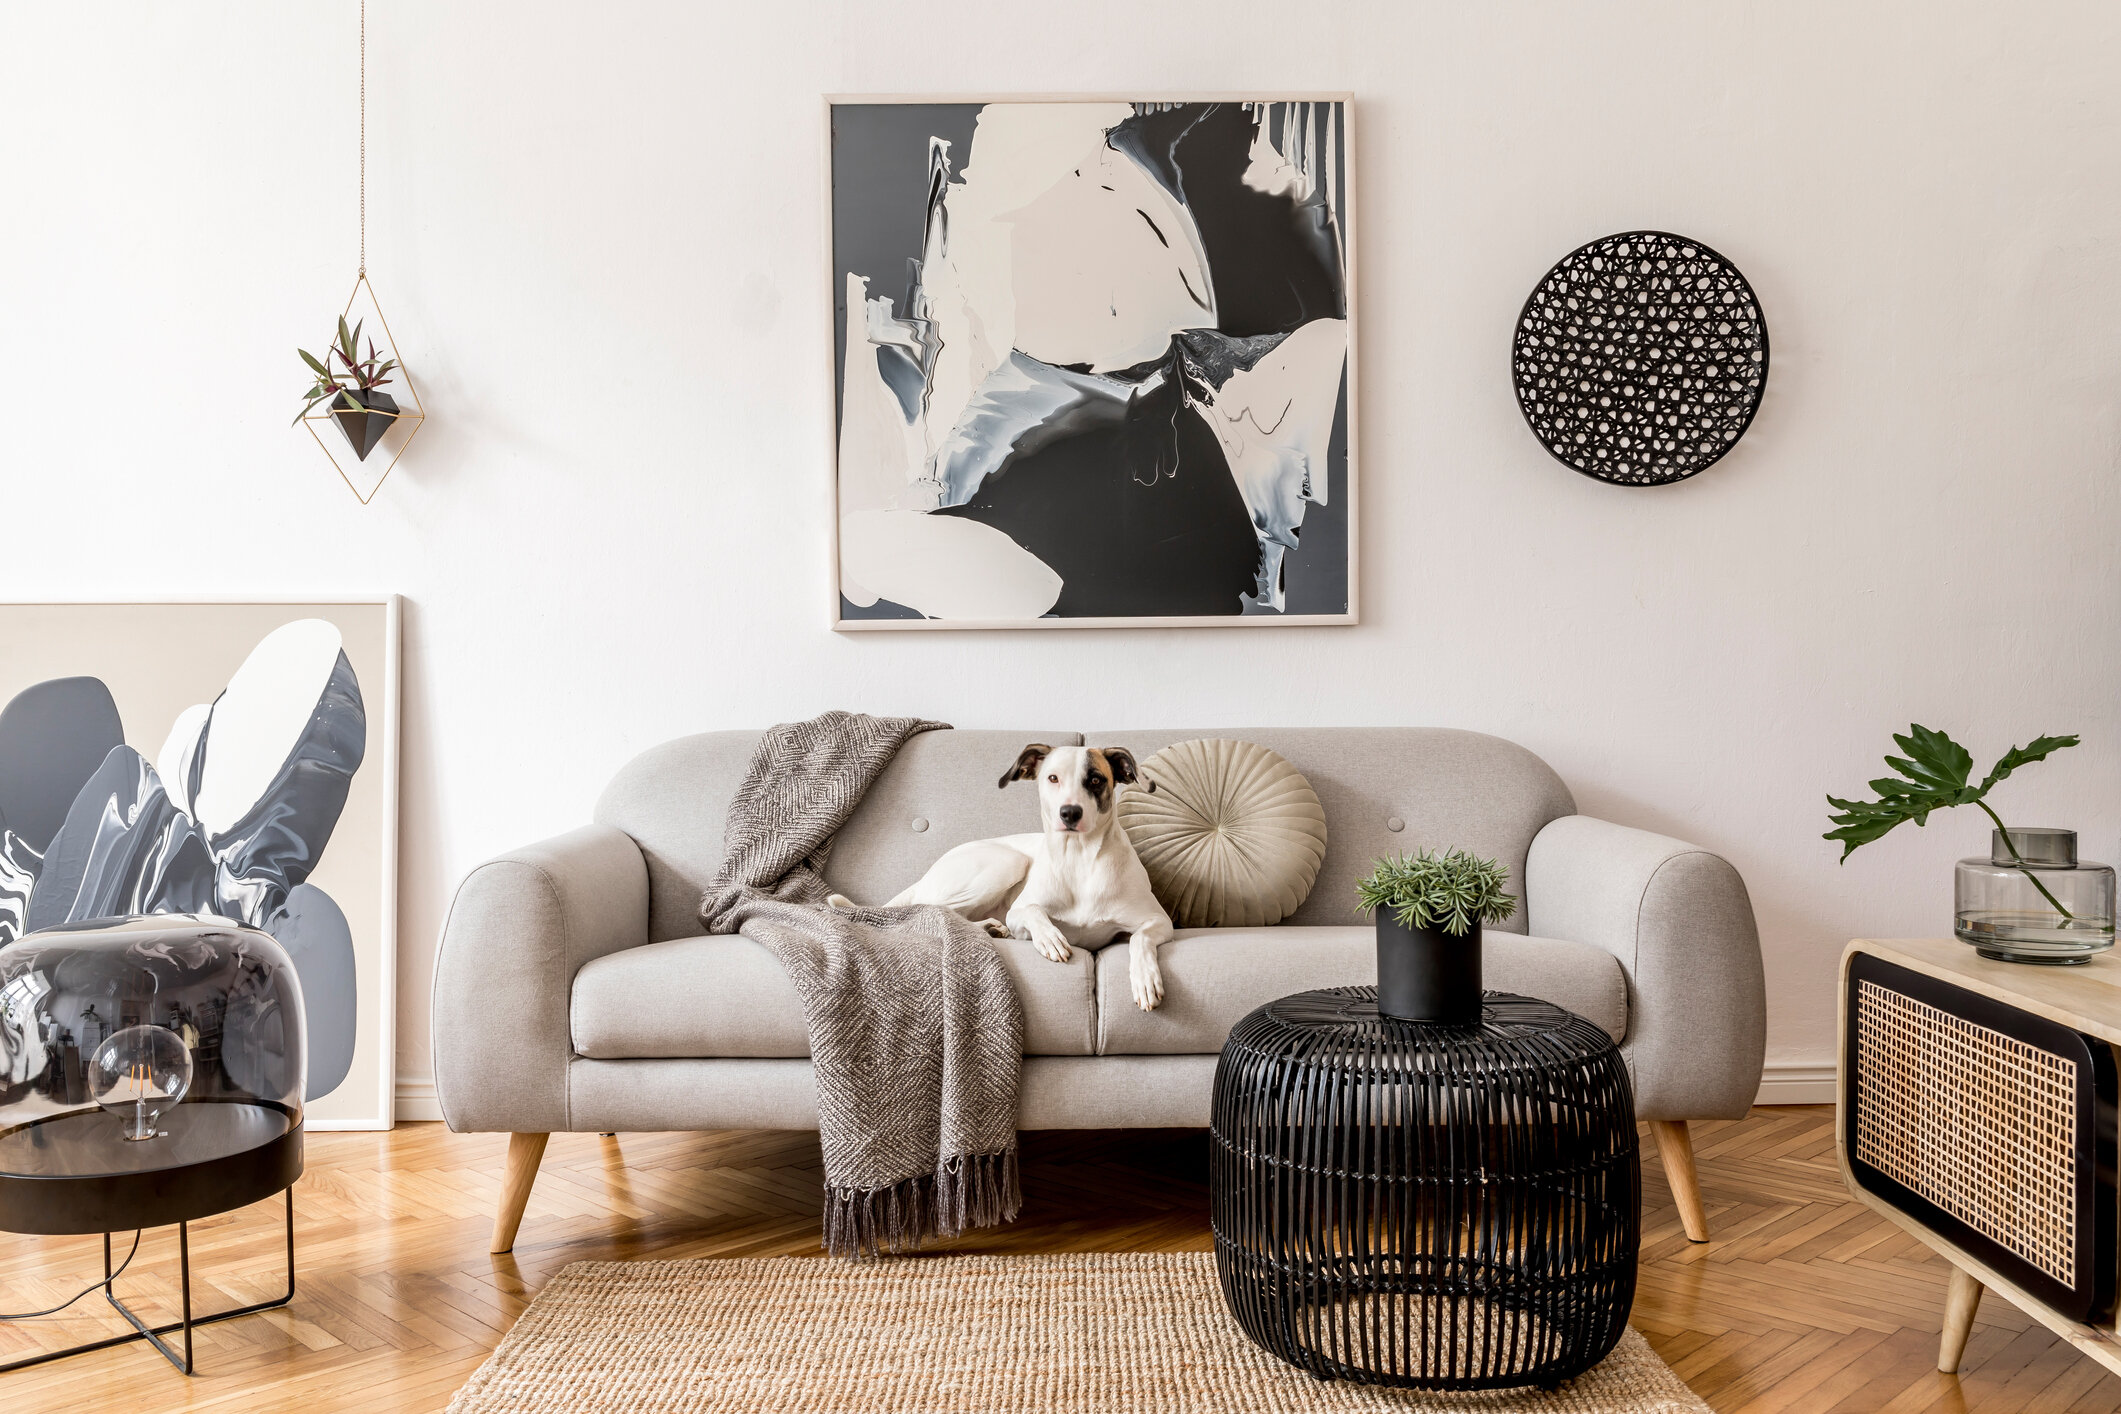 Interior Design Inspo: Tips For Finding The Right Vibe For Your